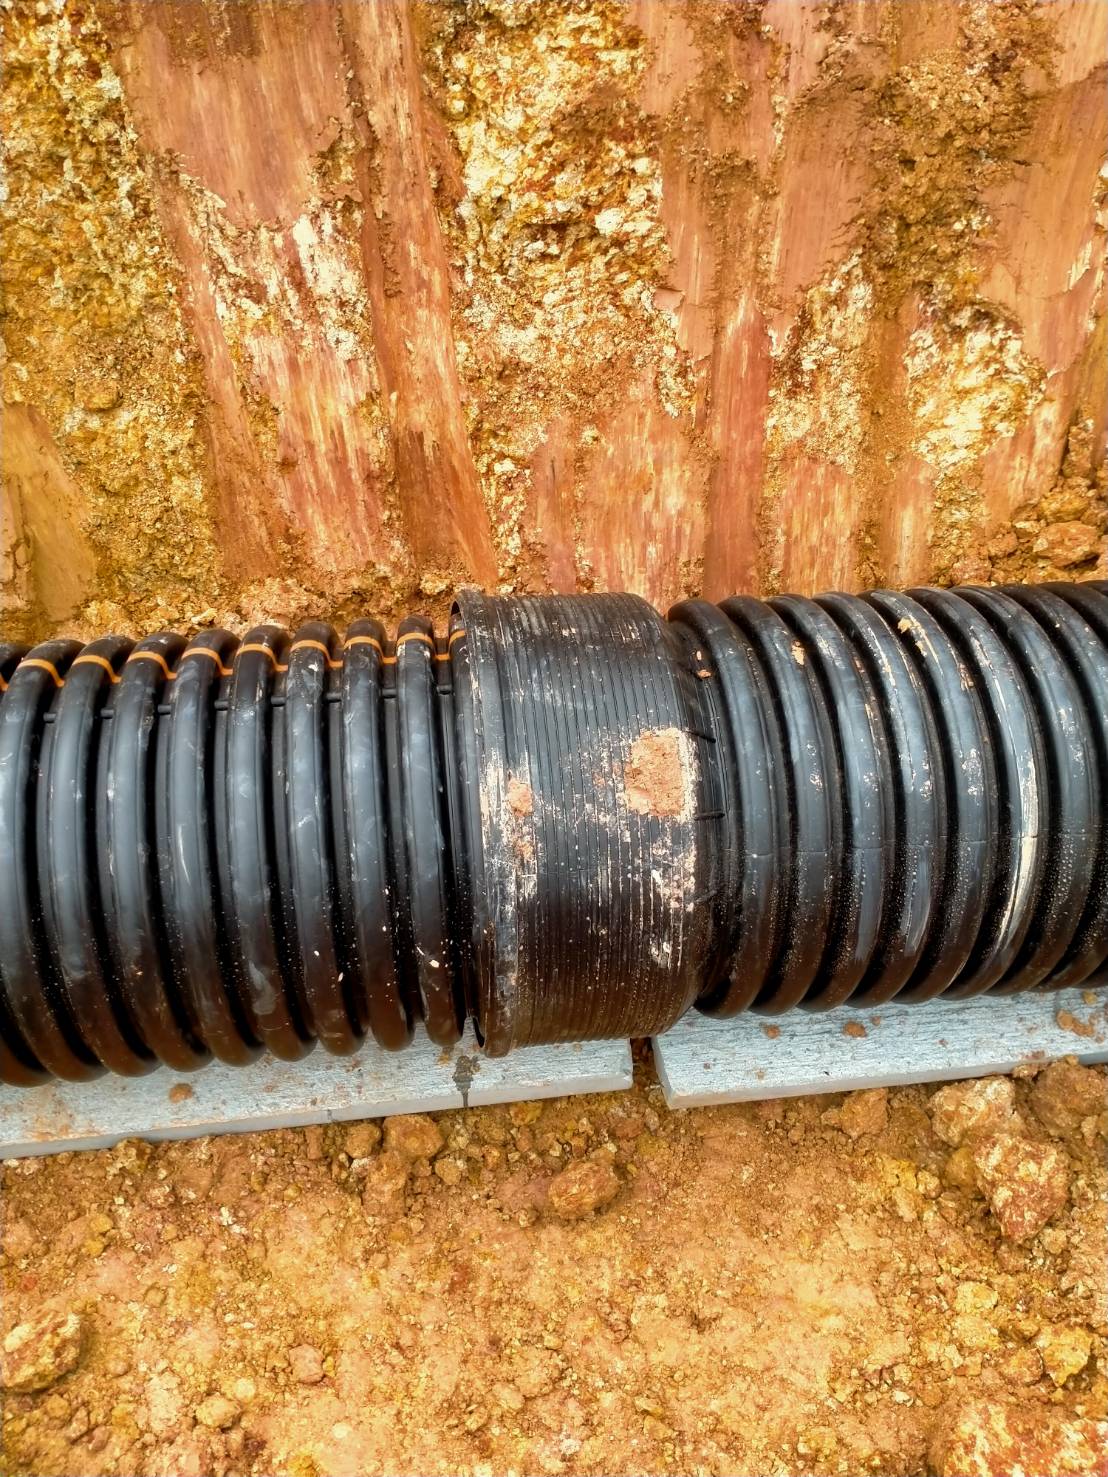 The connections of corrugated pipes ( TAPKORR ) are made in the piping system of the industrial estate